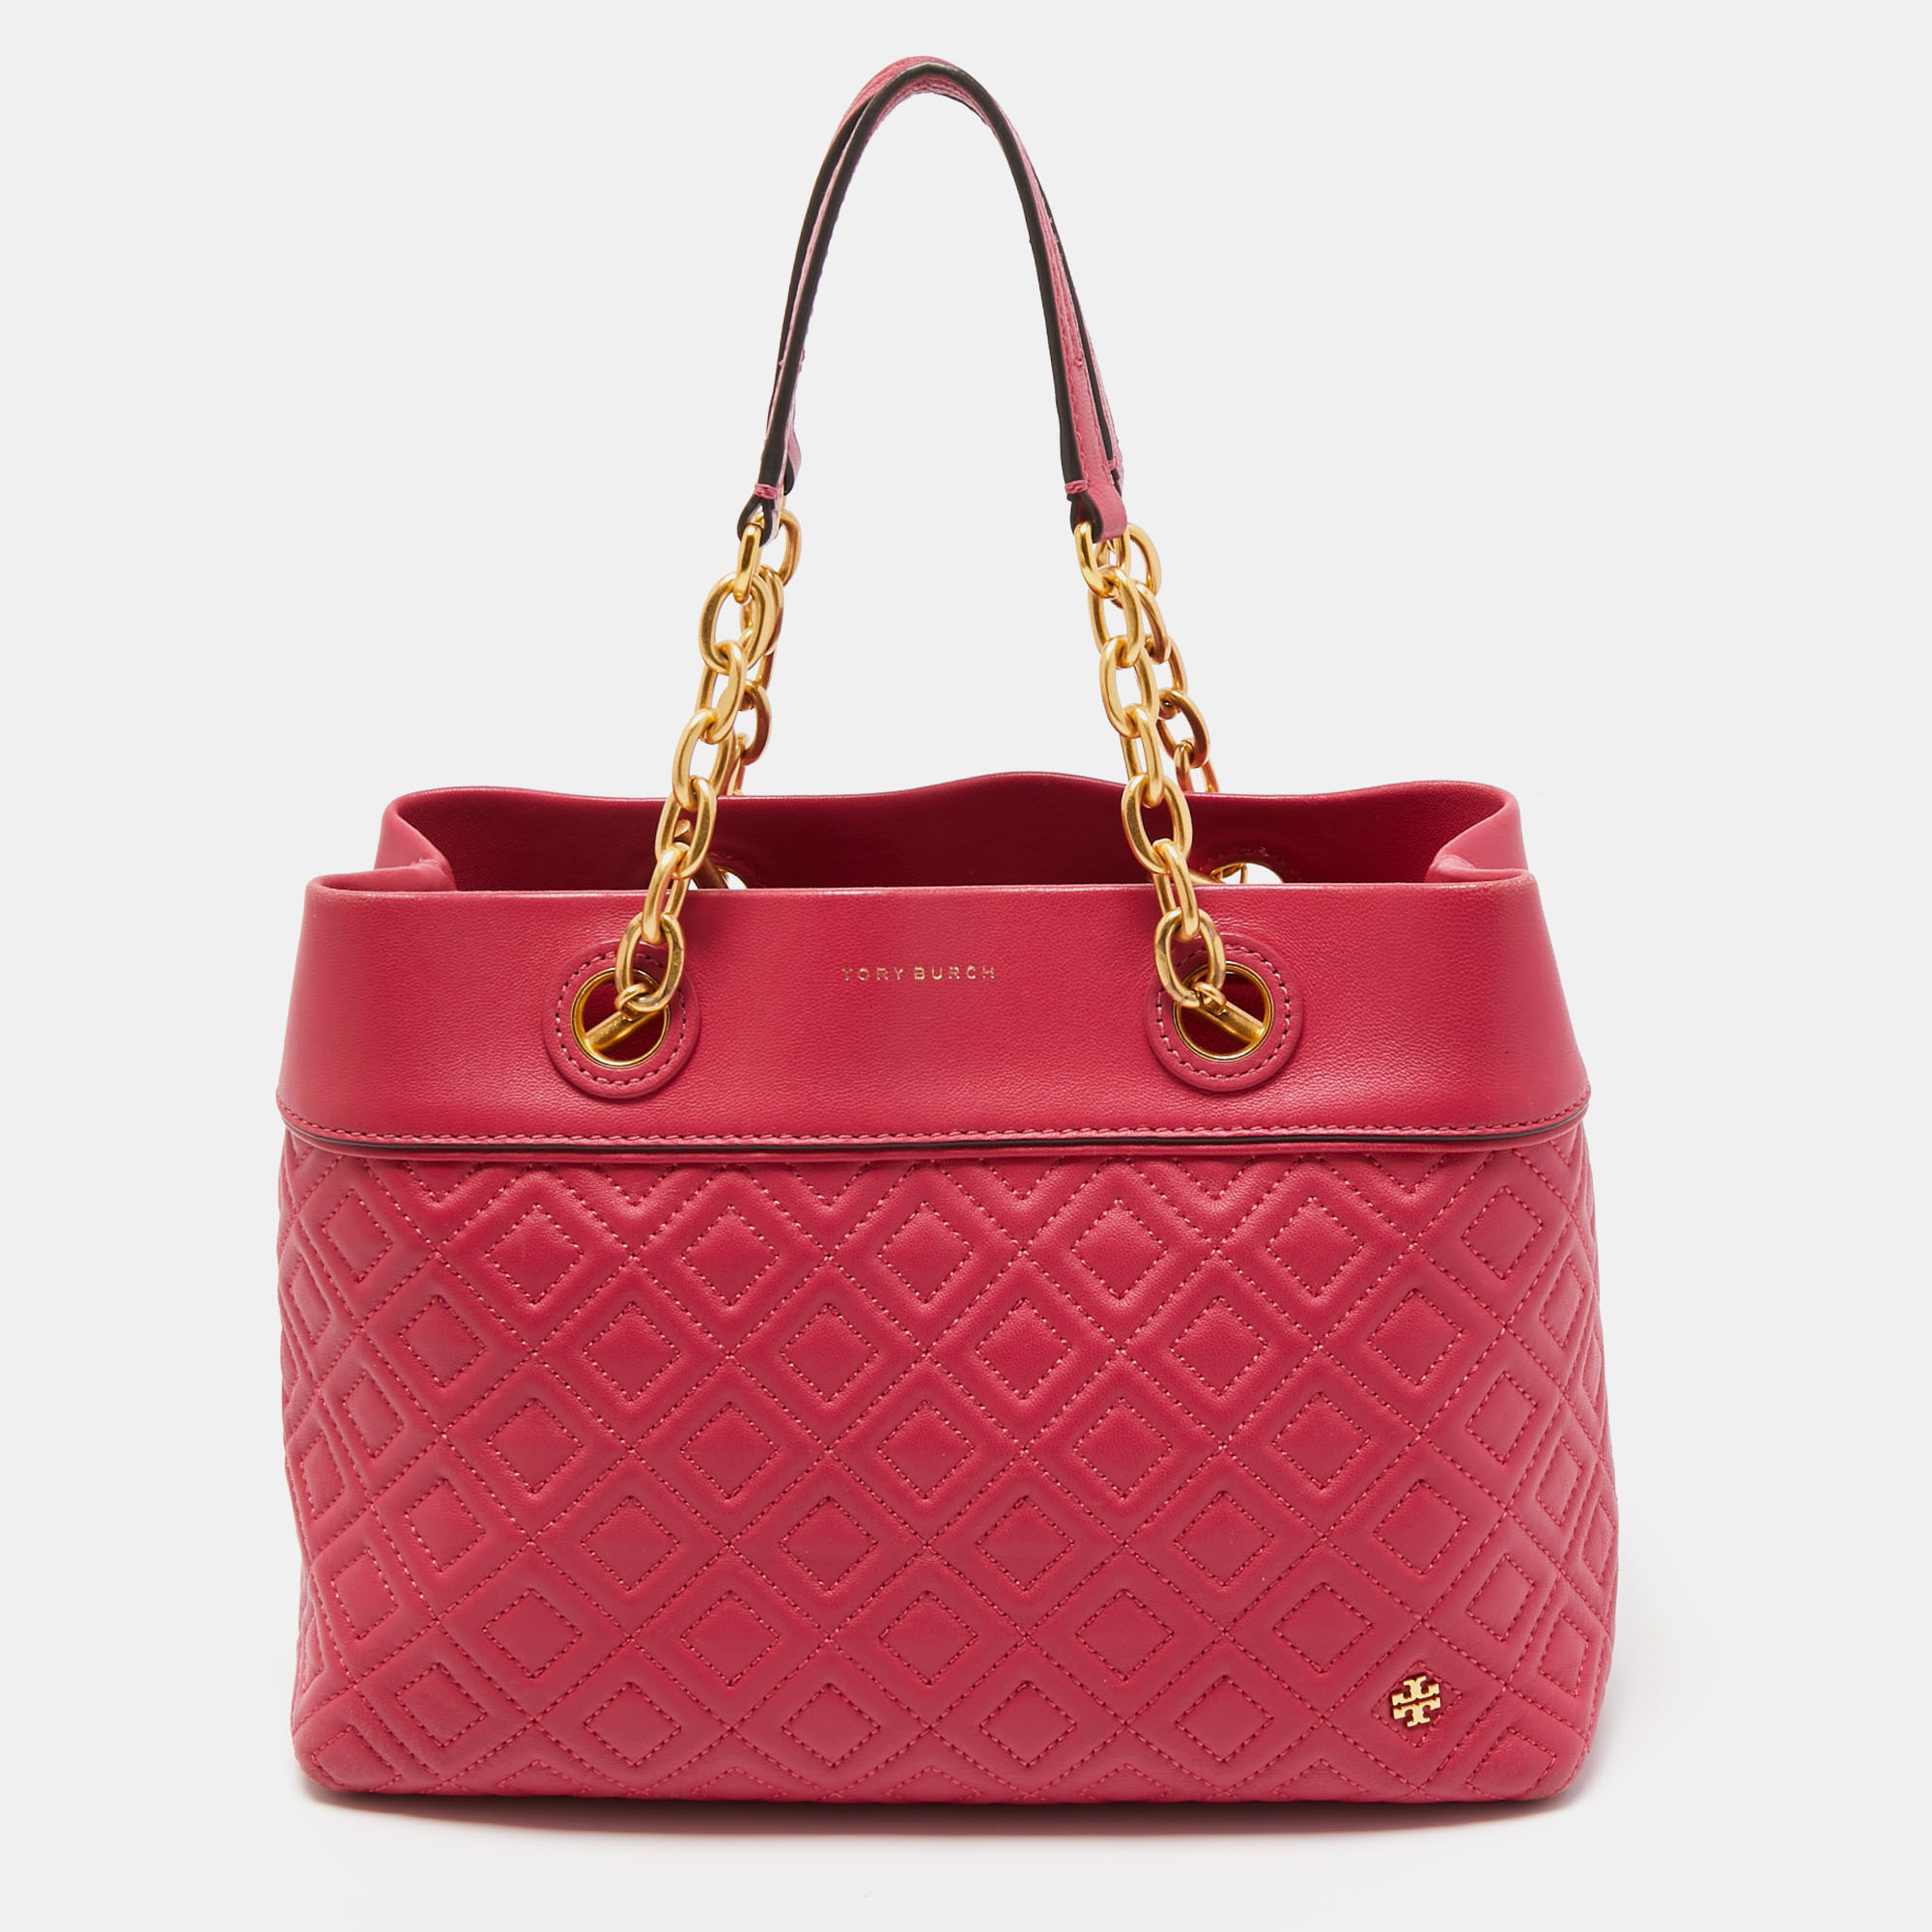 Tory Burch Dark Pink Quilted Leather Fleming Tote